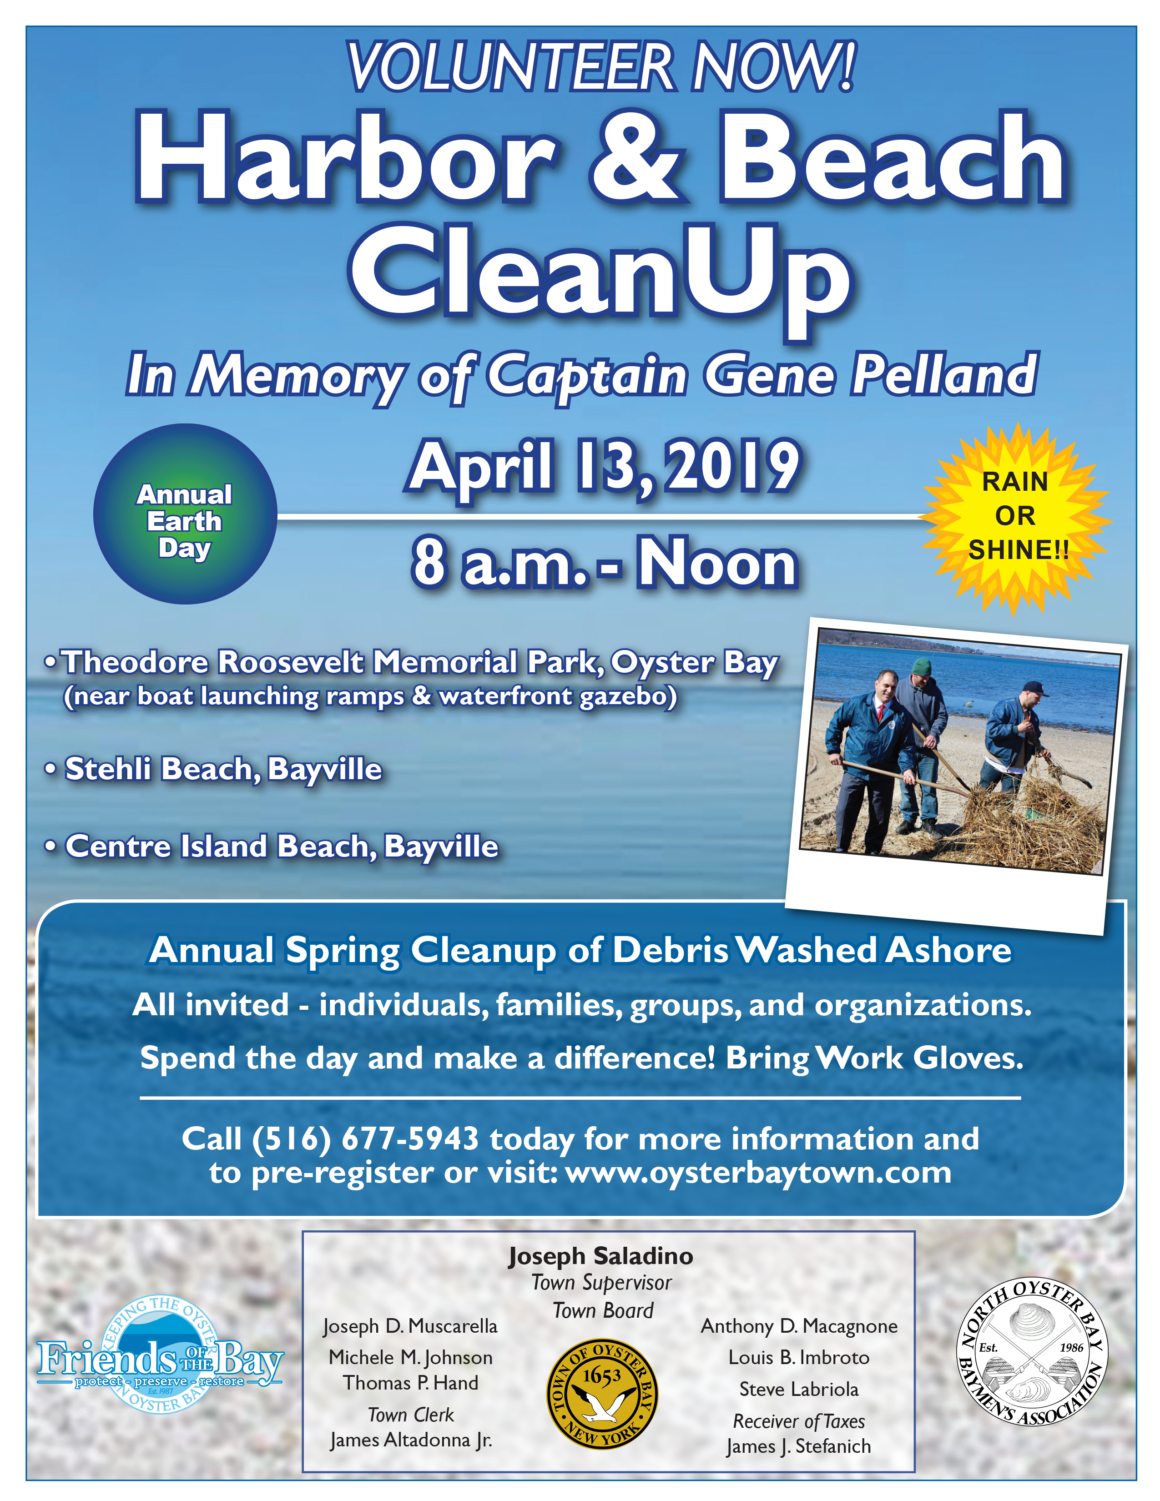 Saladino, Johnson Announce Oyster Bay Spring Harbor Cleanup April 13th